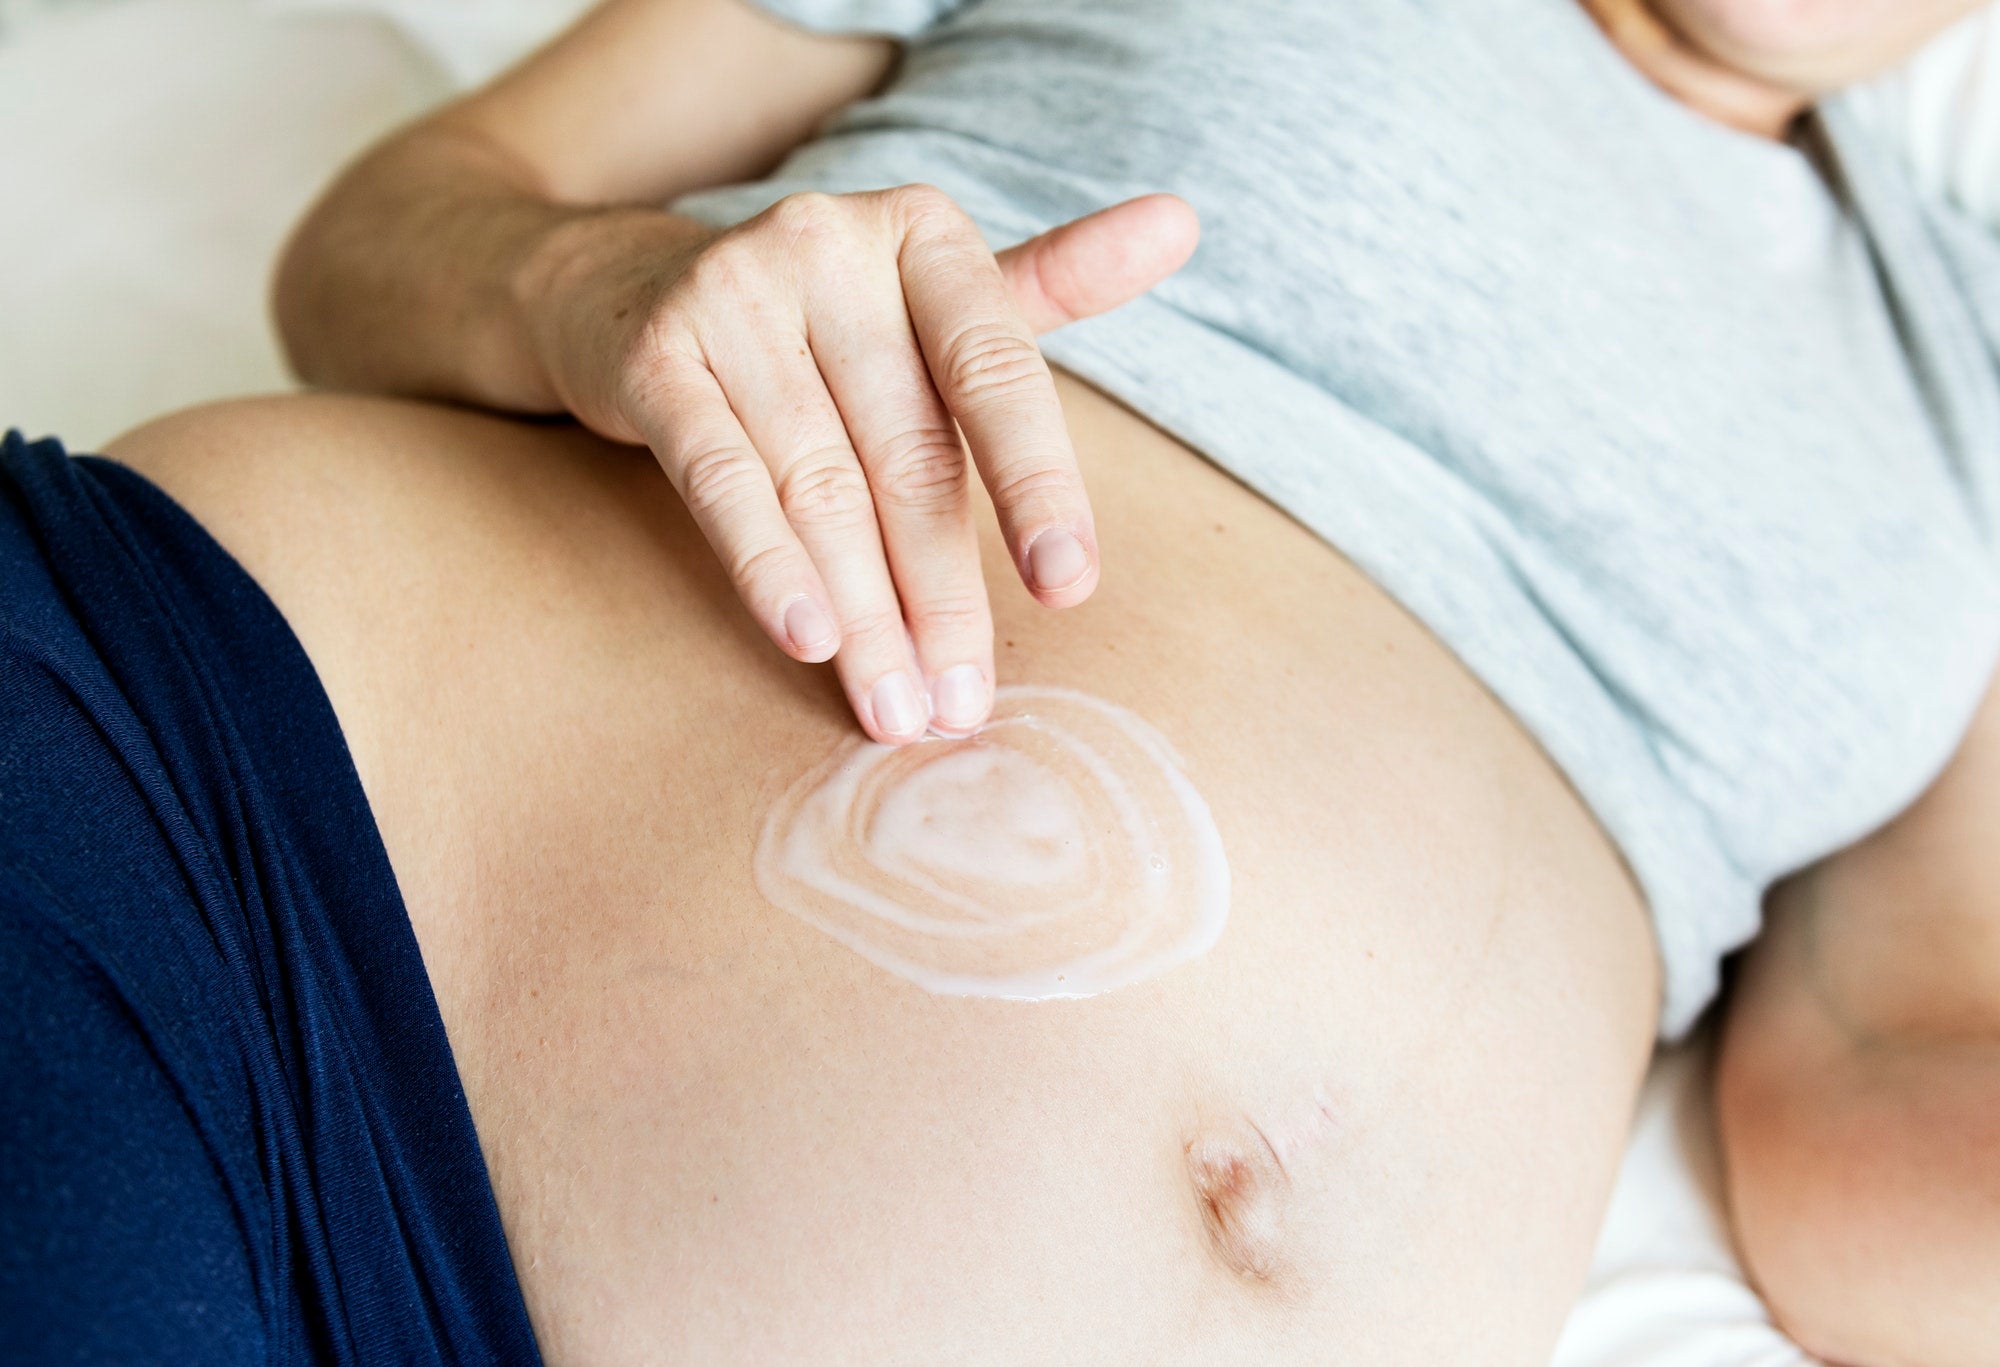 Dry Skin Pregnancy? 5 Causes And Treatments For Expecting Moms